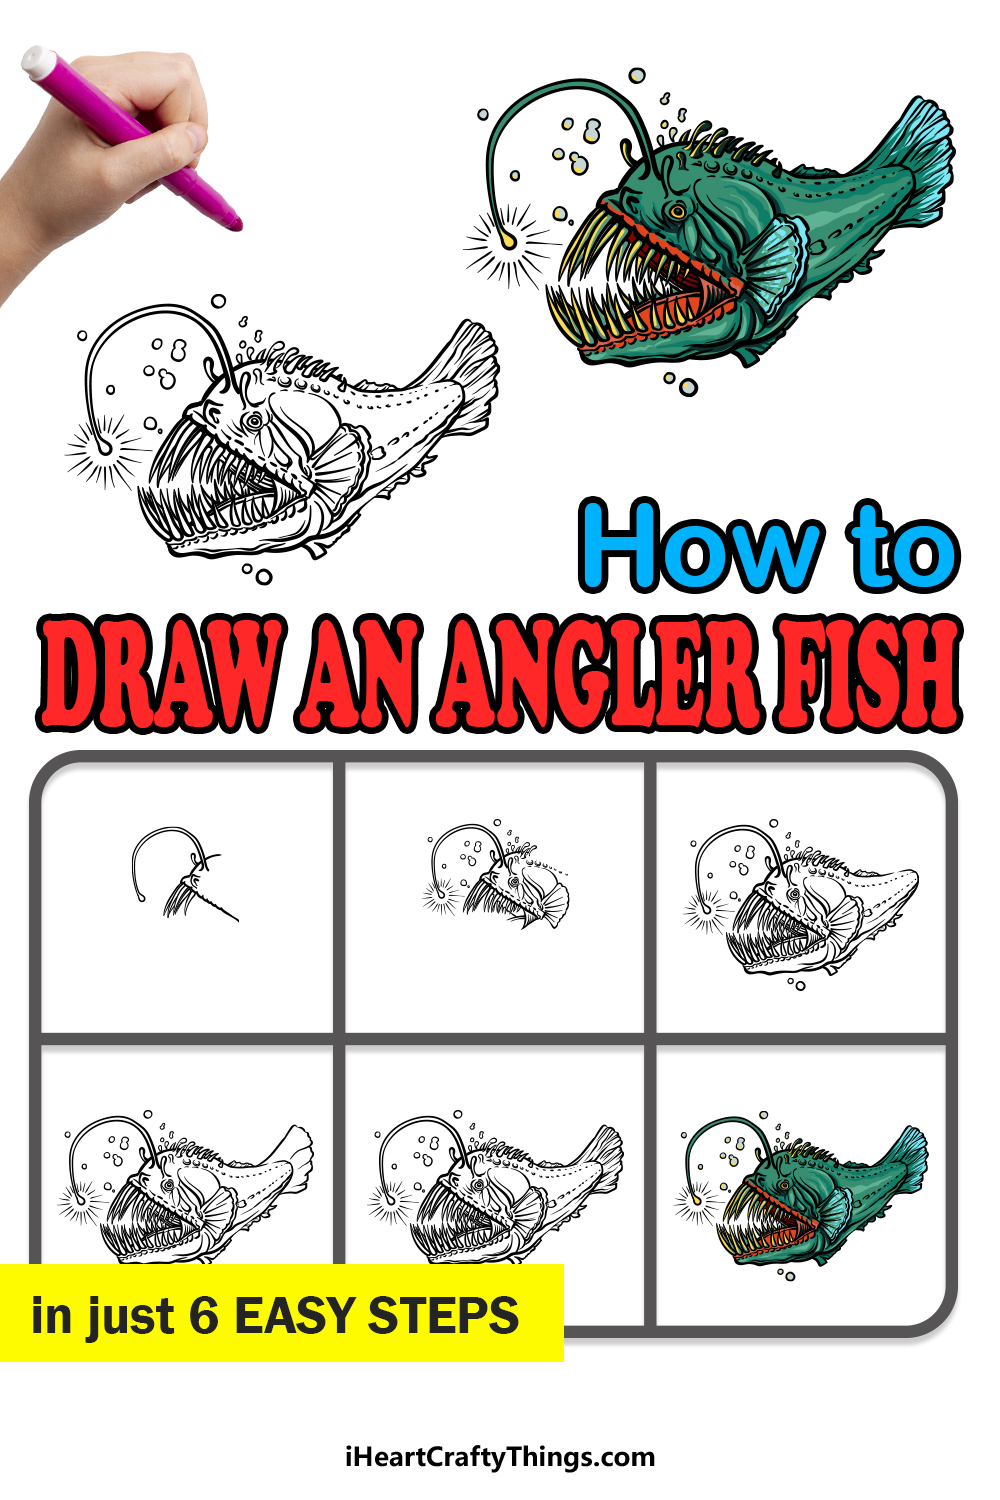 how to draw an Angler Fish in 6 easy steps